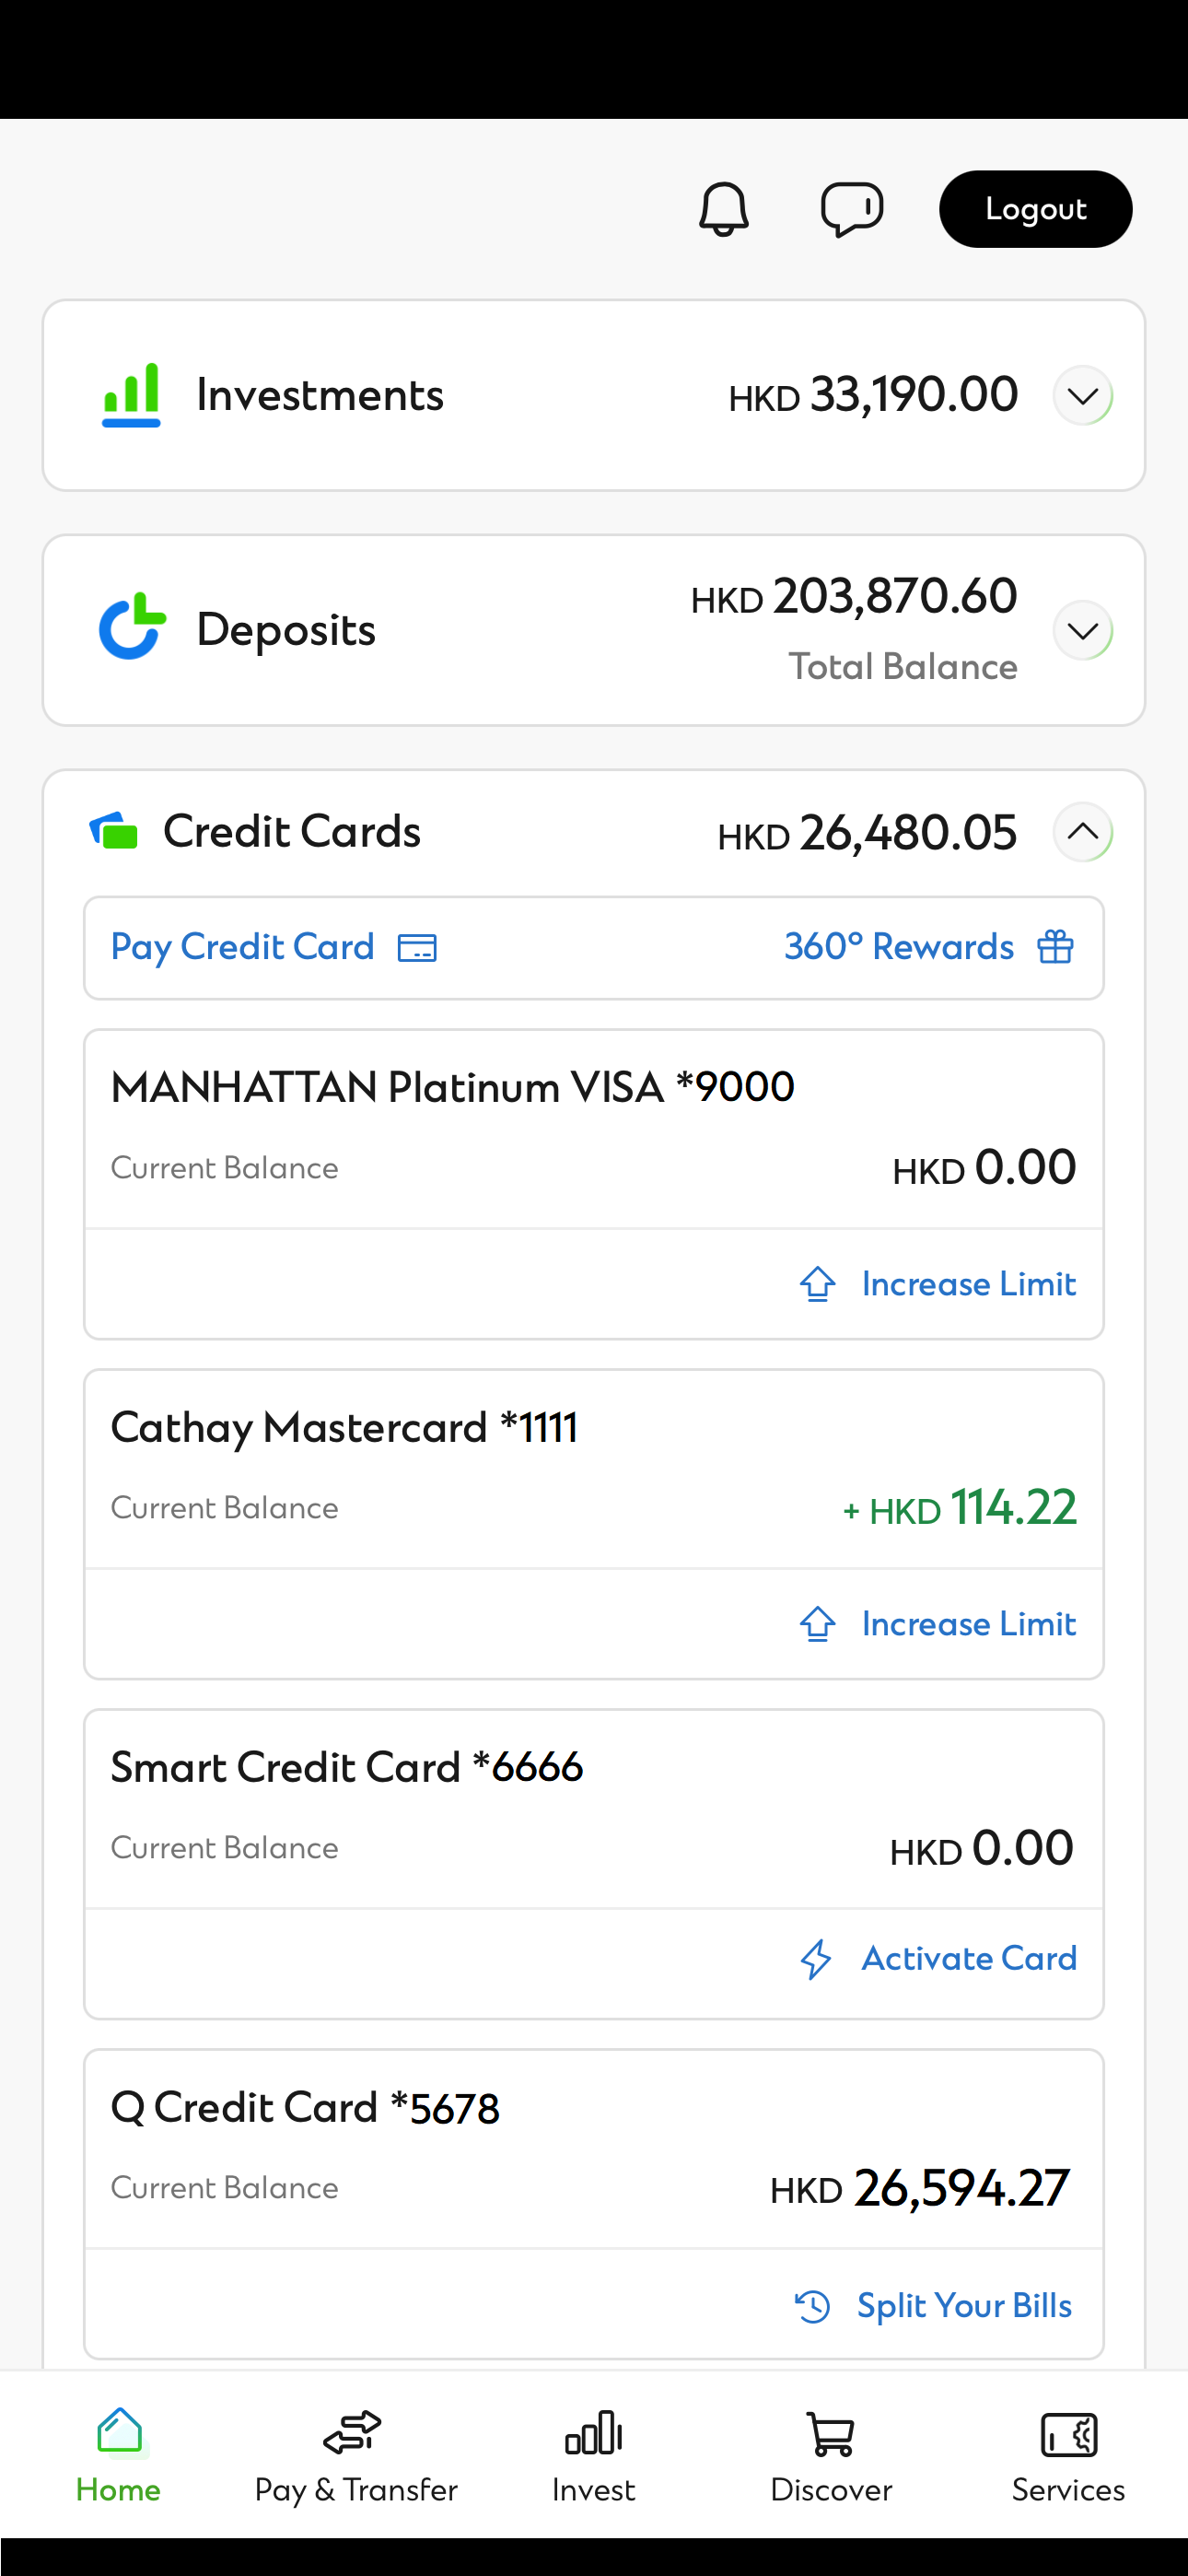 After login to SC Mobile, tap the credit card accounts you wish to view.